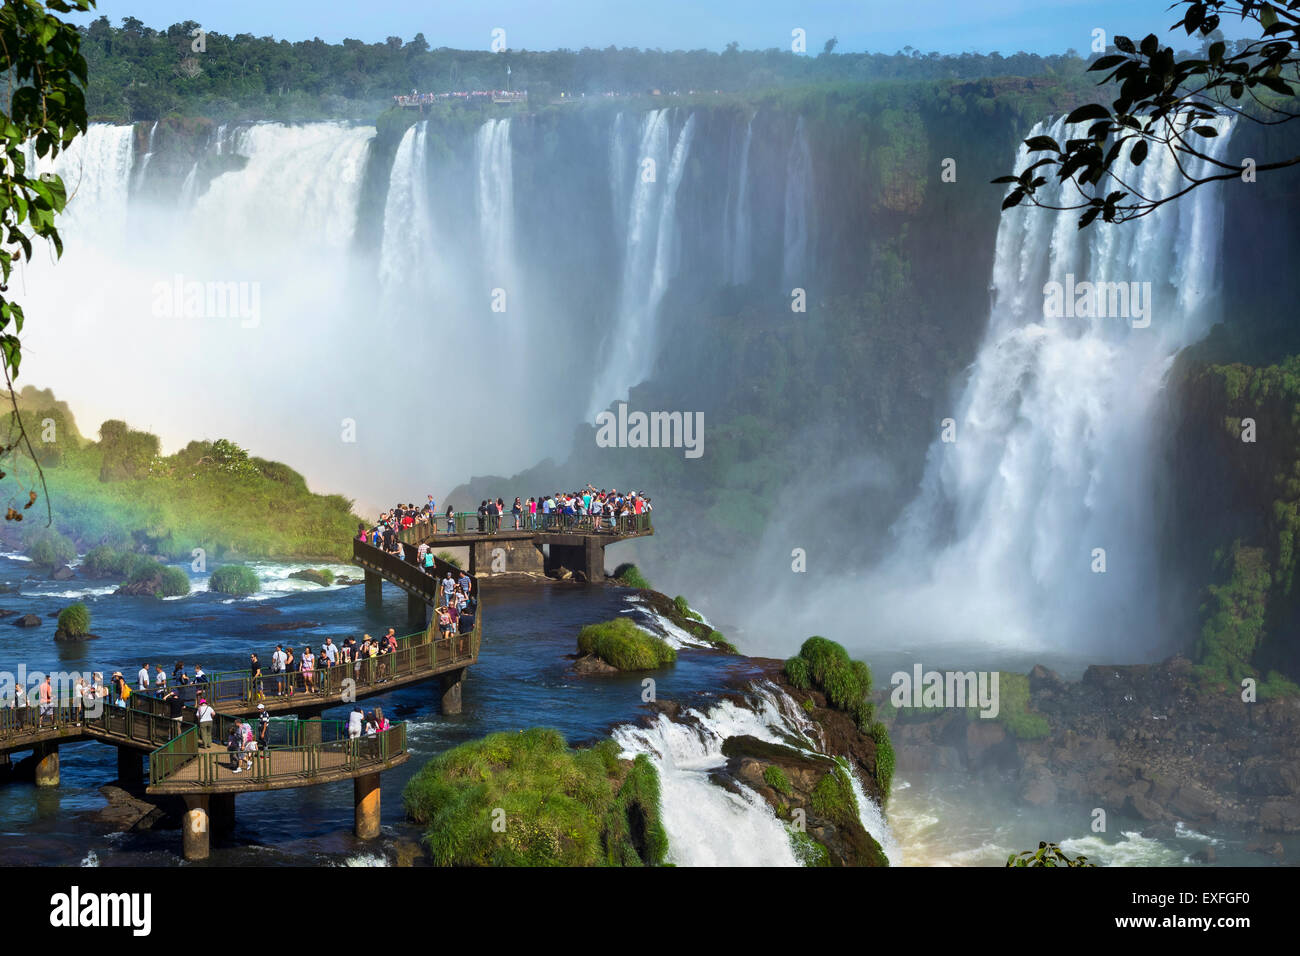 Tourists at Iguazu Falls, one of the world's great natural wonders, near the border of Argentina and Brazil. Stock Photo